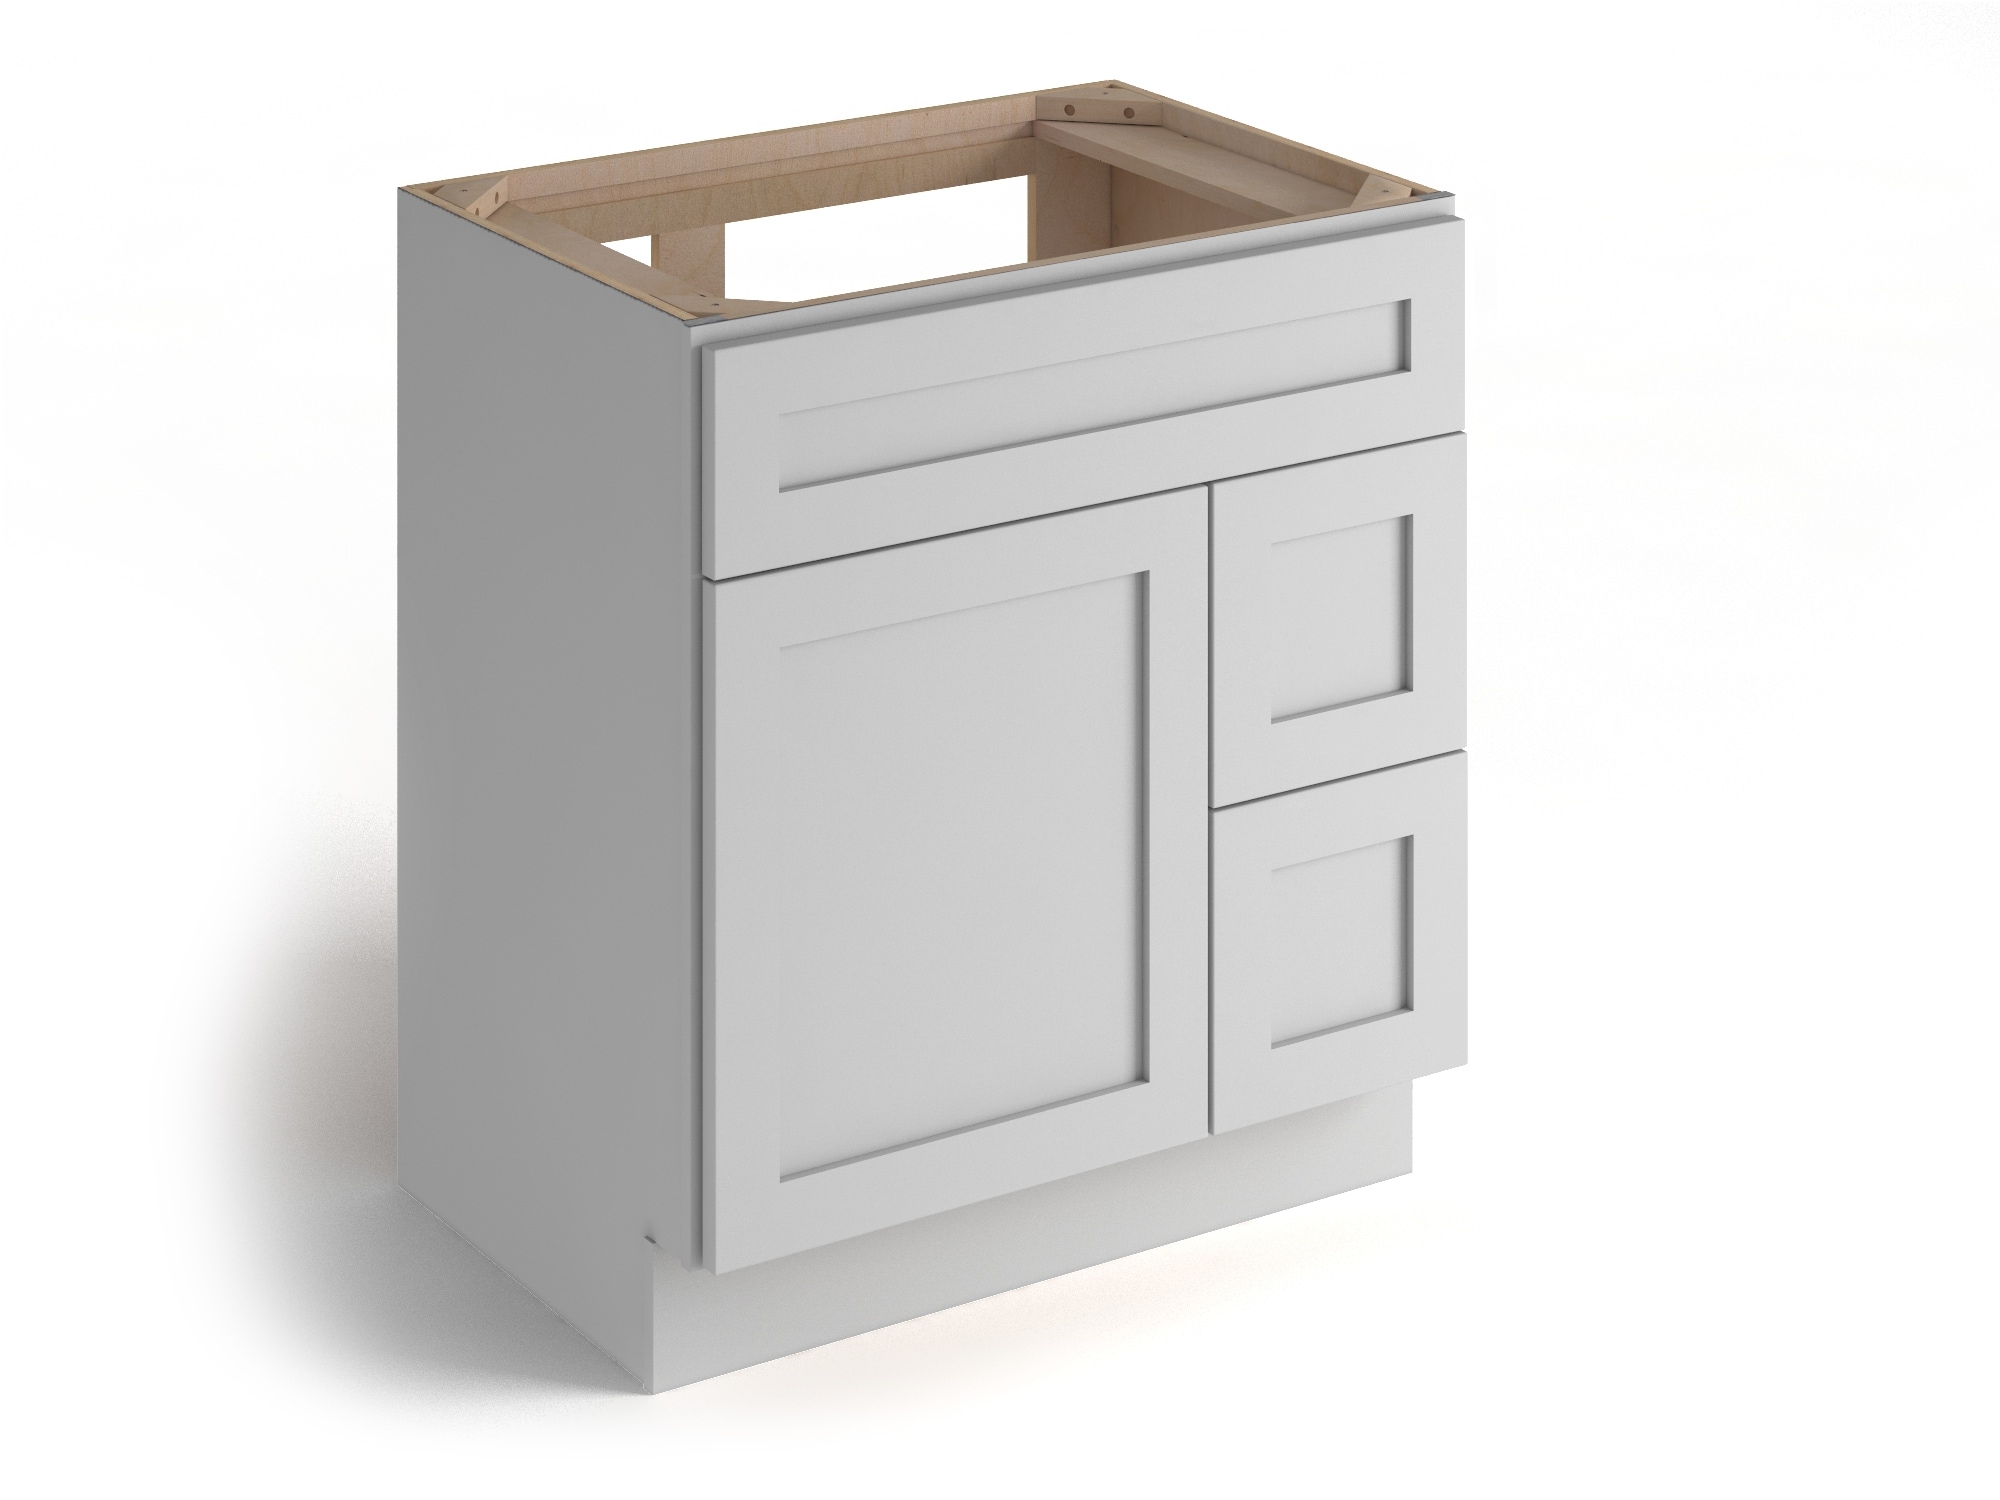 Valleywood Cabinetry Bathroom Vanities without Tops at Lowes.com